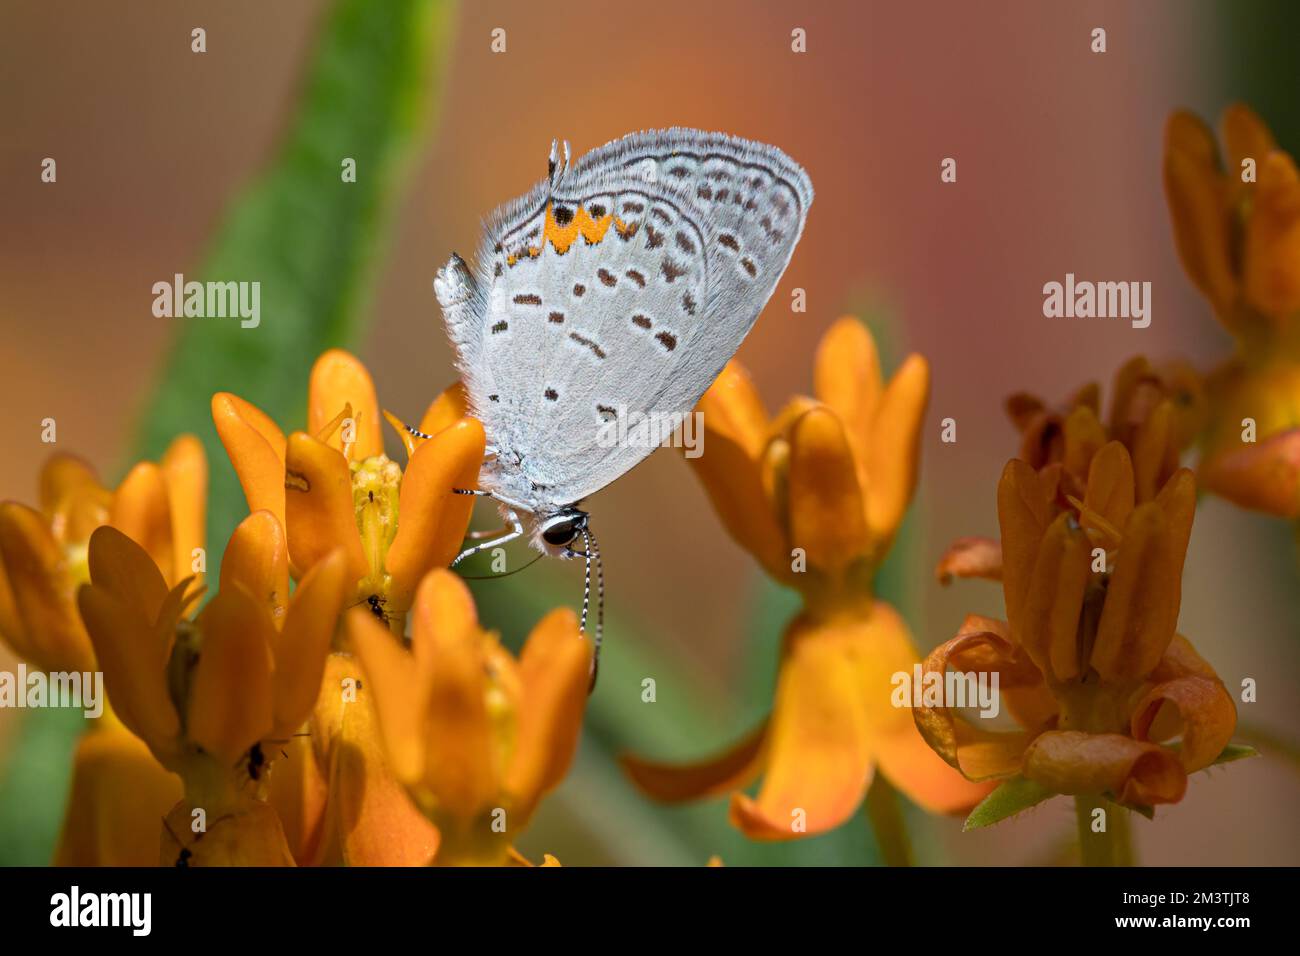 Closeup of Gray Hairstreak butterfly in flower garden. Insect and nature conservation, habitat preservation, and backyard flower garden concept. Stock Photo